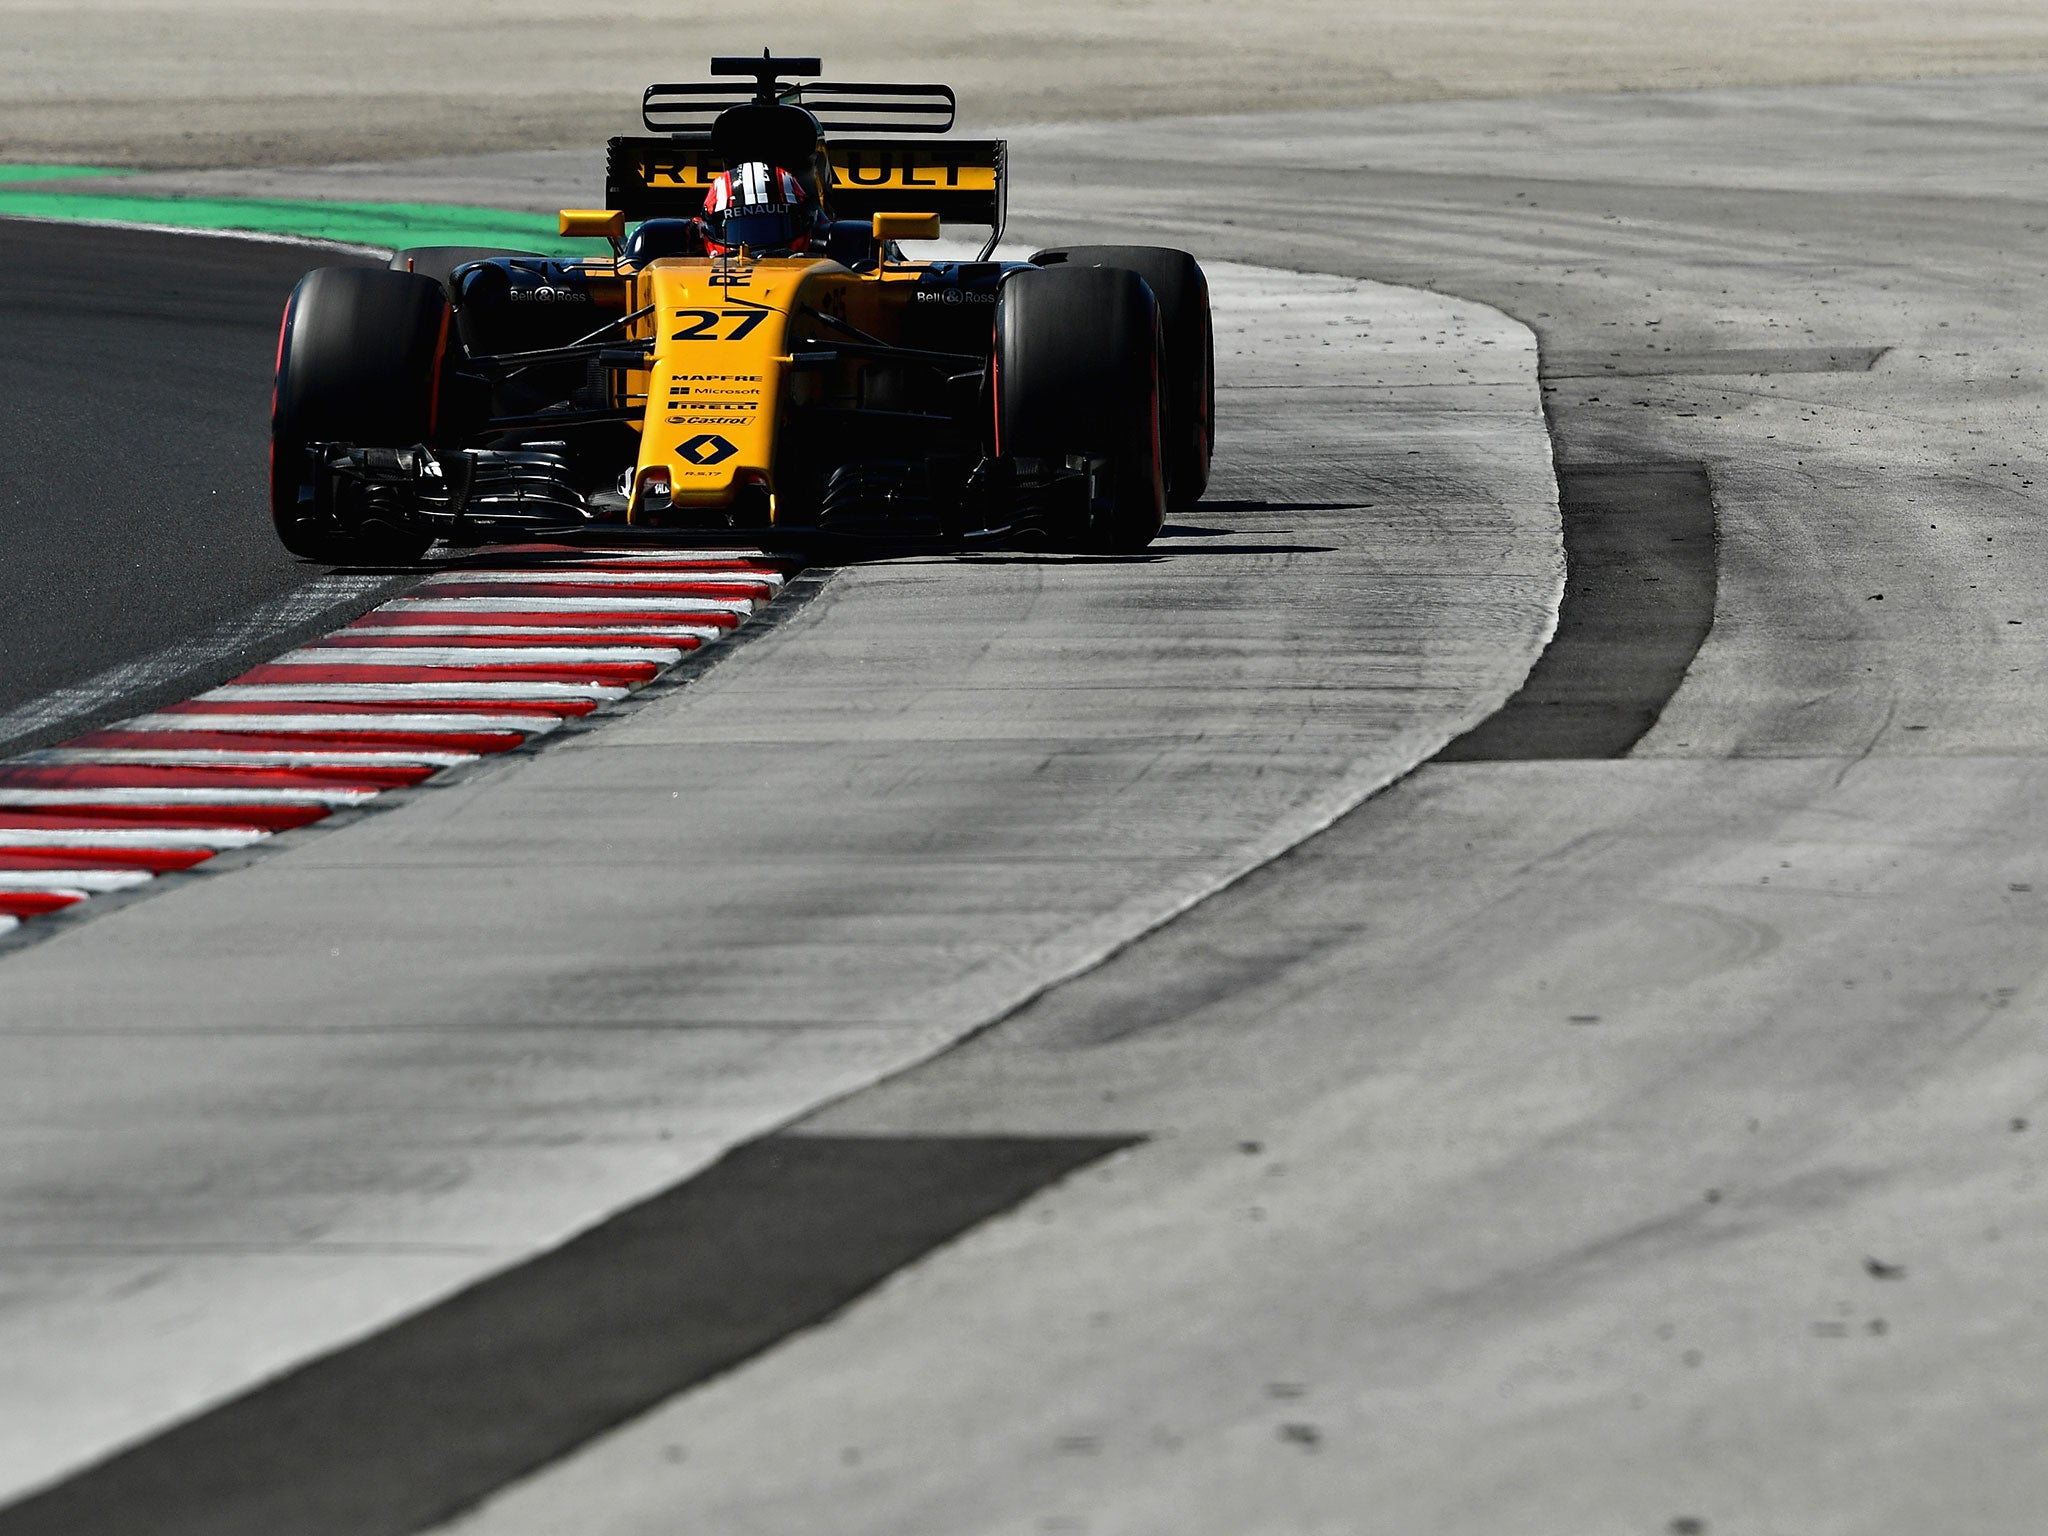 Hulkenberg was forced off the road by Magnussen late in the race